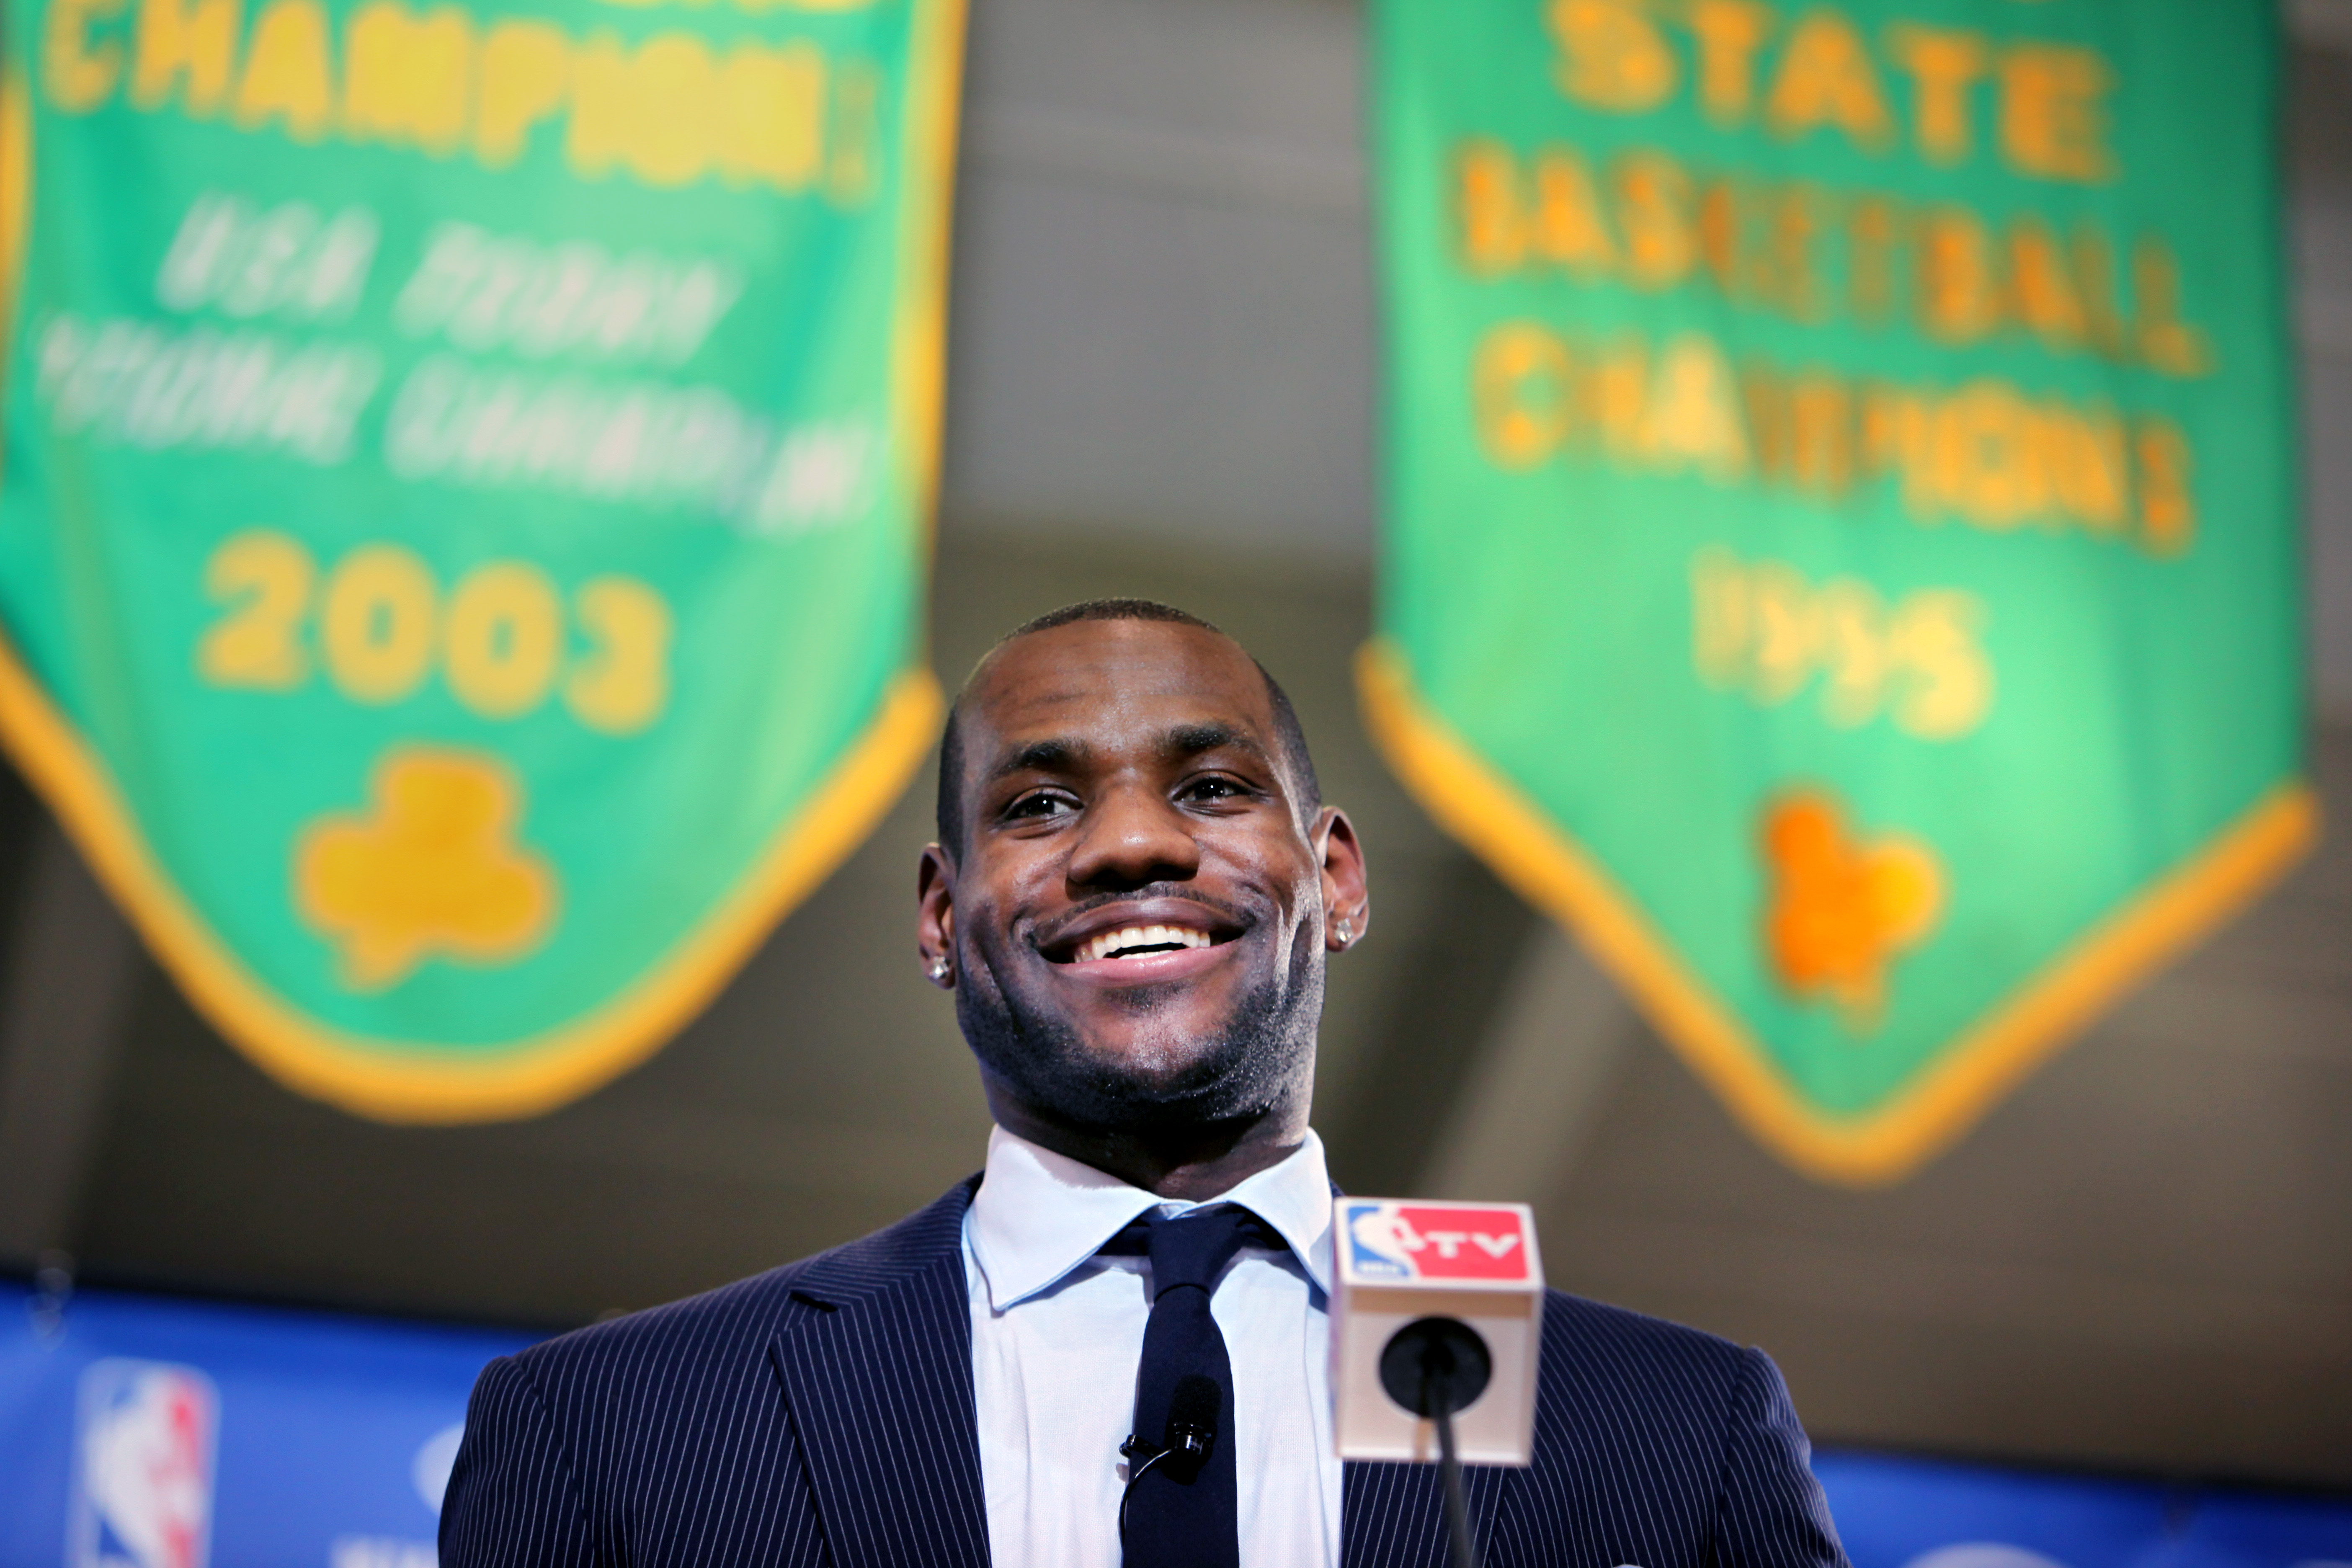 LeBron James gives a speech after being named the NBA's Most Valuable Player  at a ceremony at St. Vincent-St. Mary High School  Monday, May 4, 2009.   (Gus Chan / The Plain Dealer)